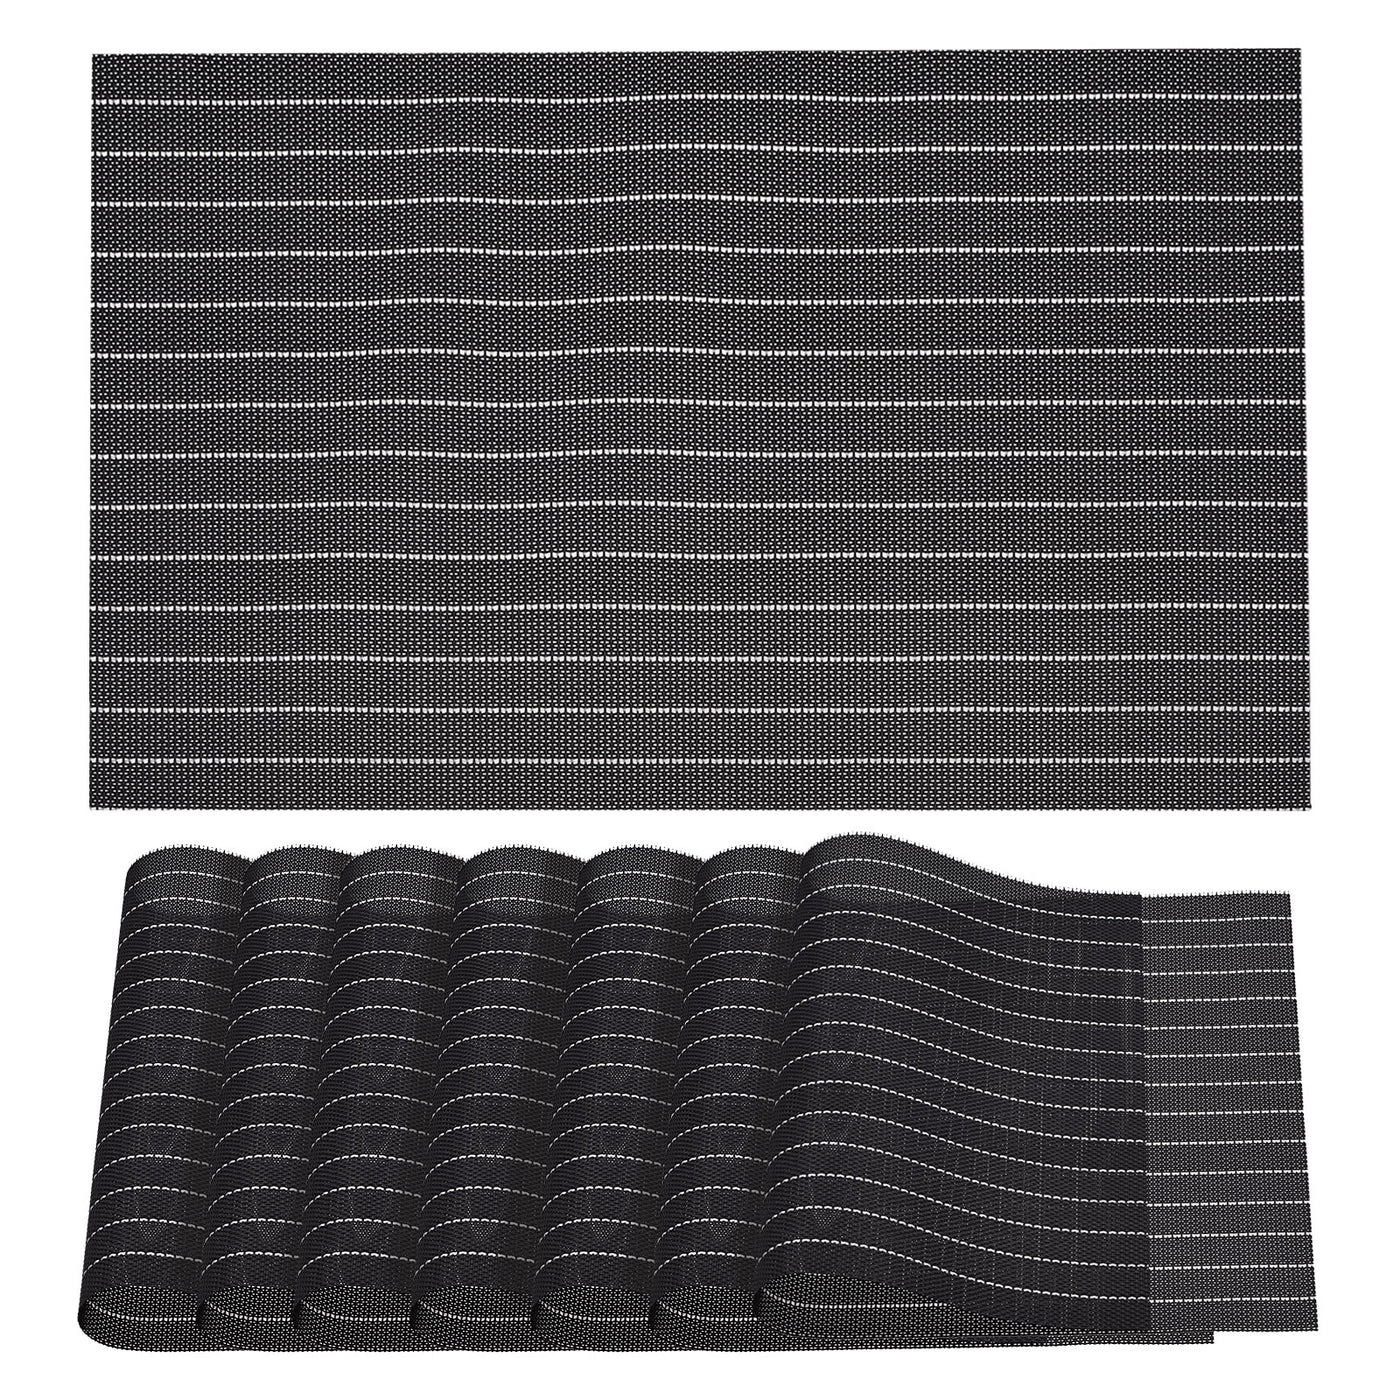 uxcell Uxcell Place Mats, 450x300mm Table Mats Set of 8 PVC Washable Woven Placemat Black